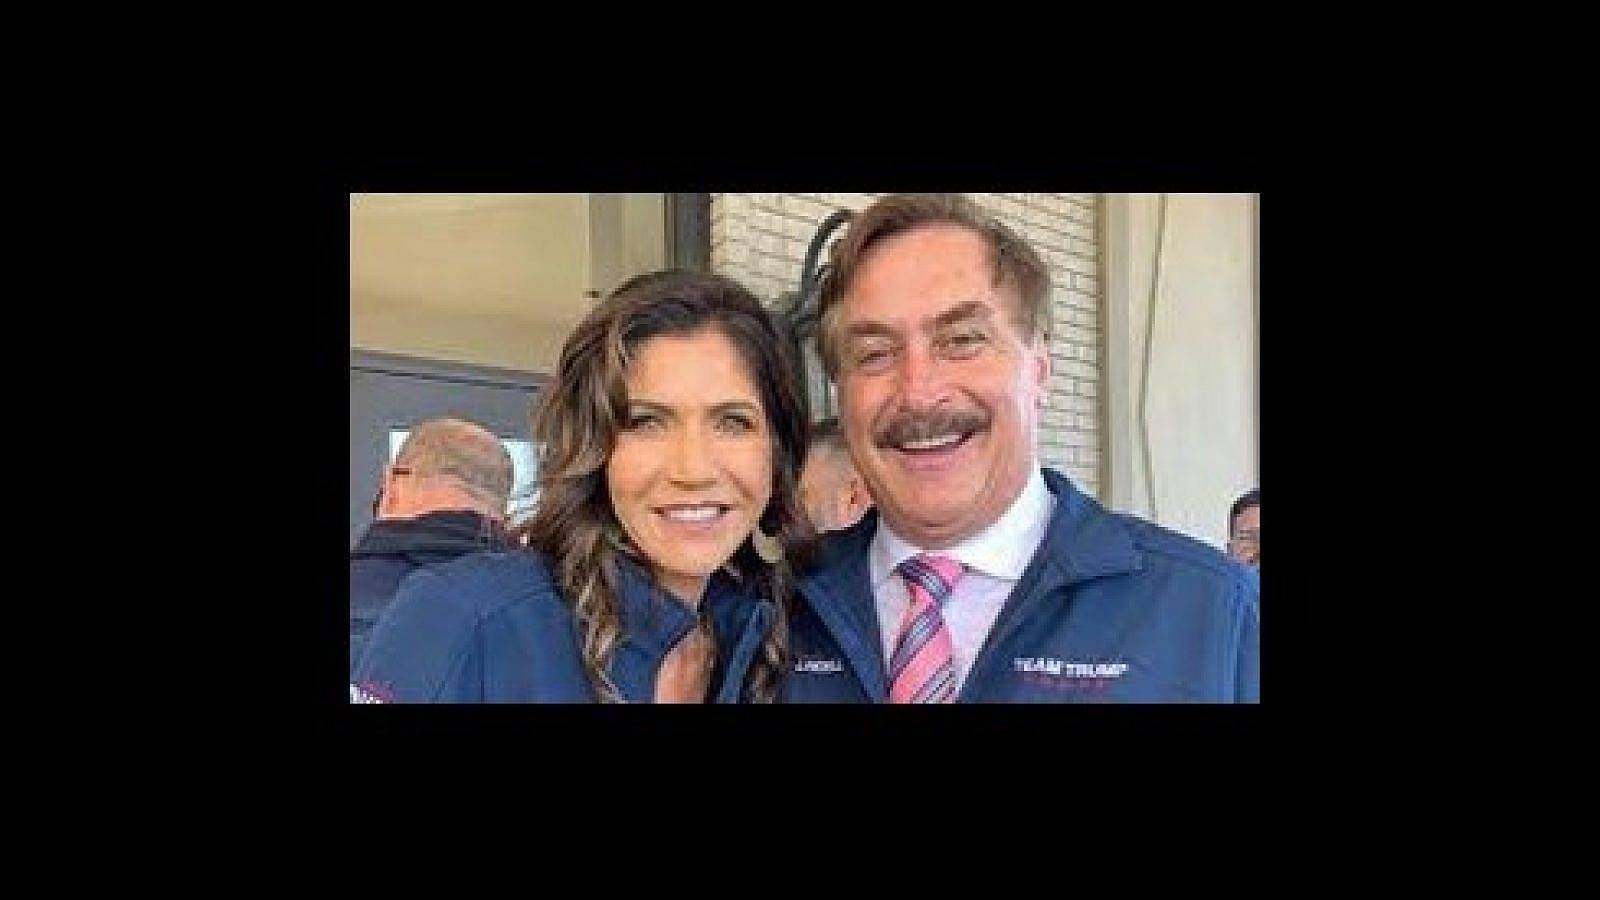 SD Governor Kristi Noem with Pillow Guy Mike Lindell